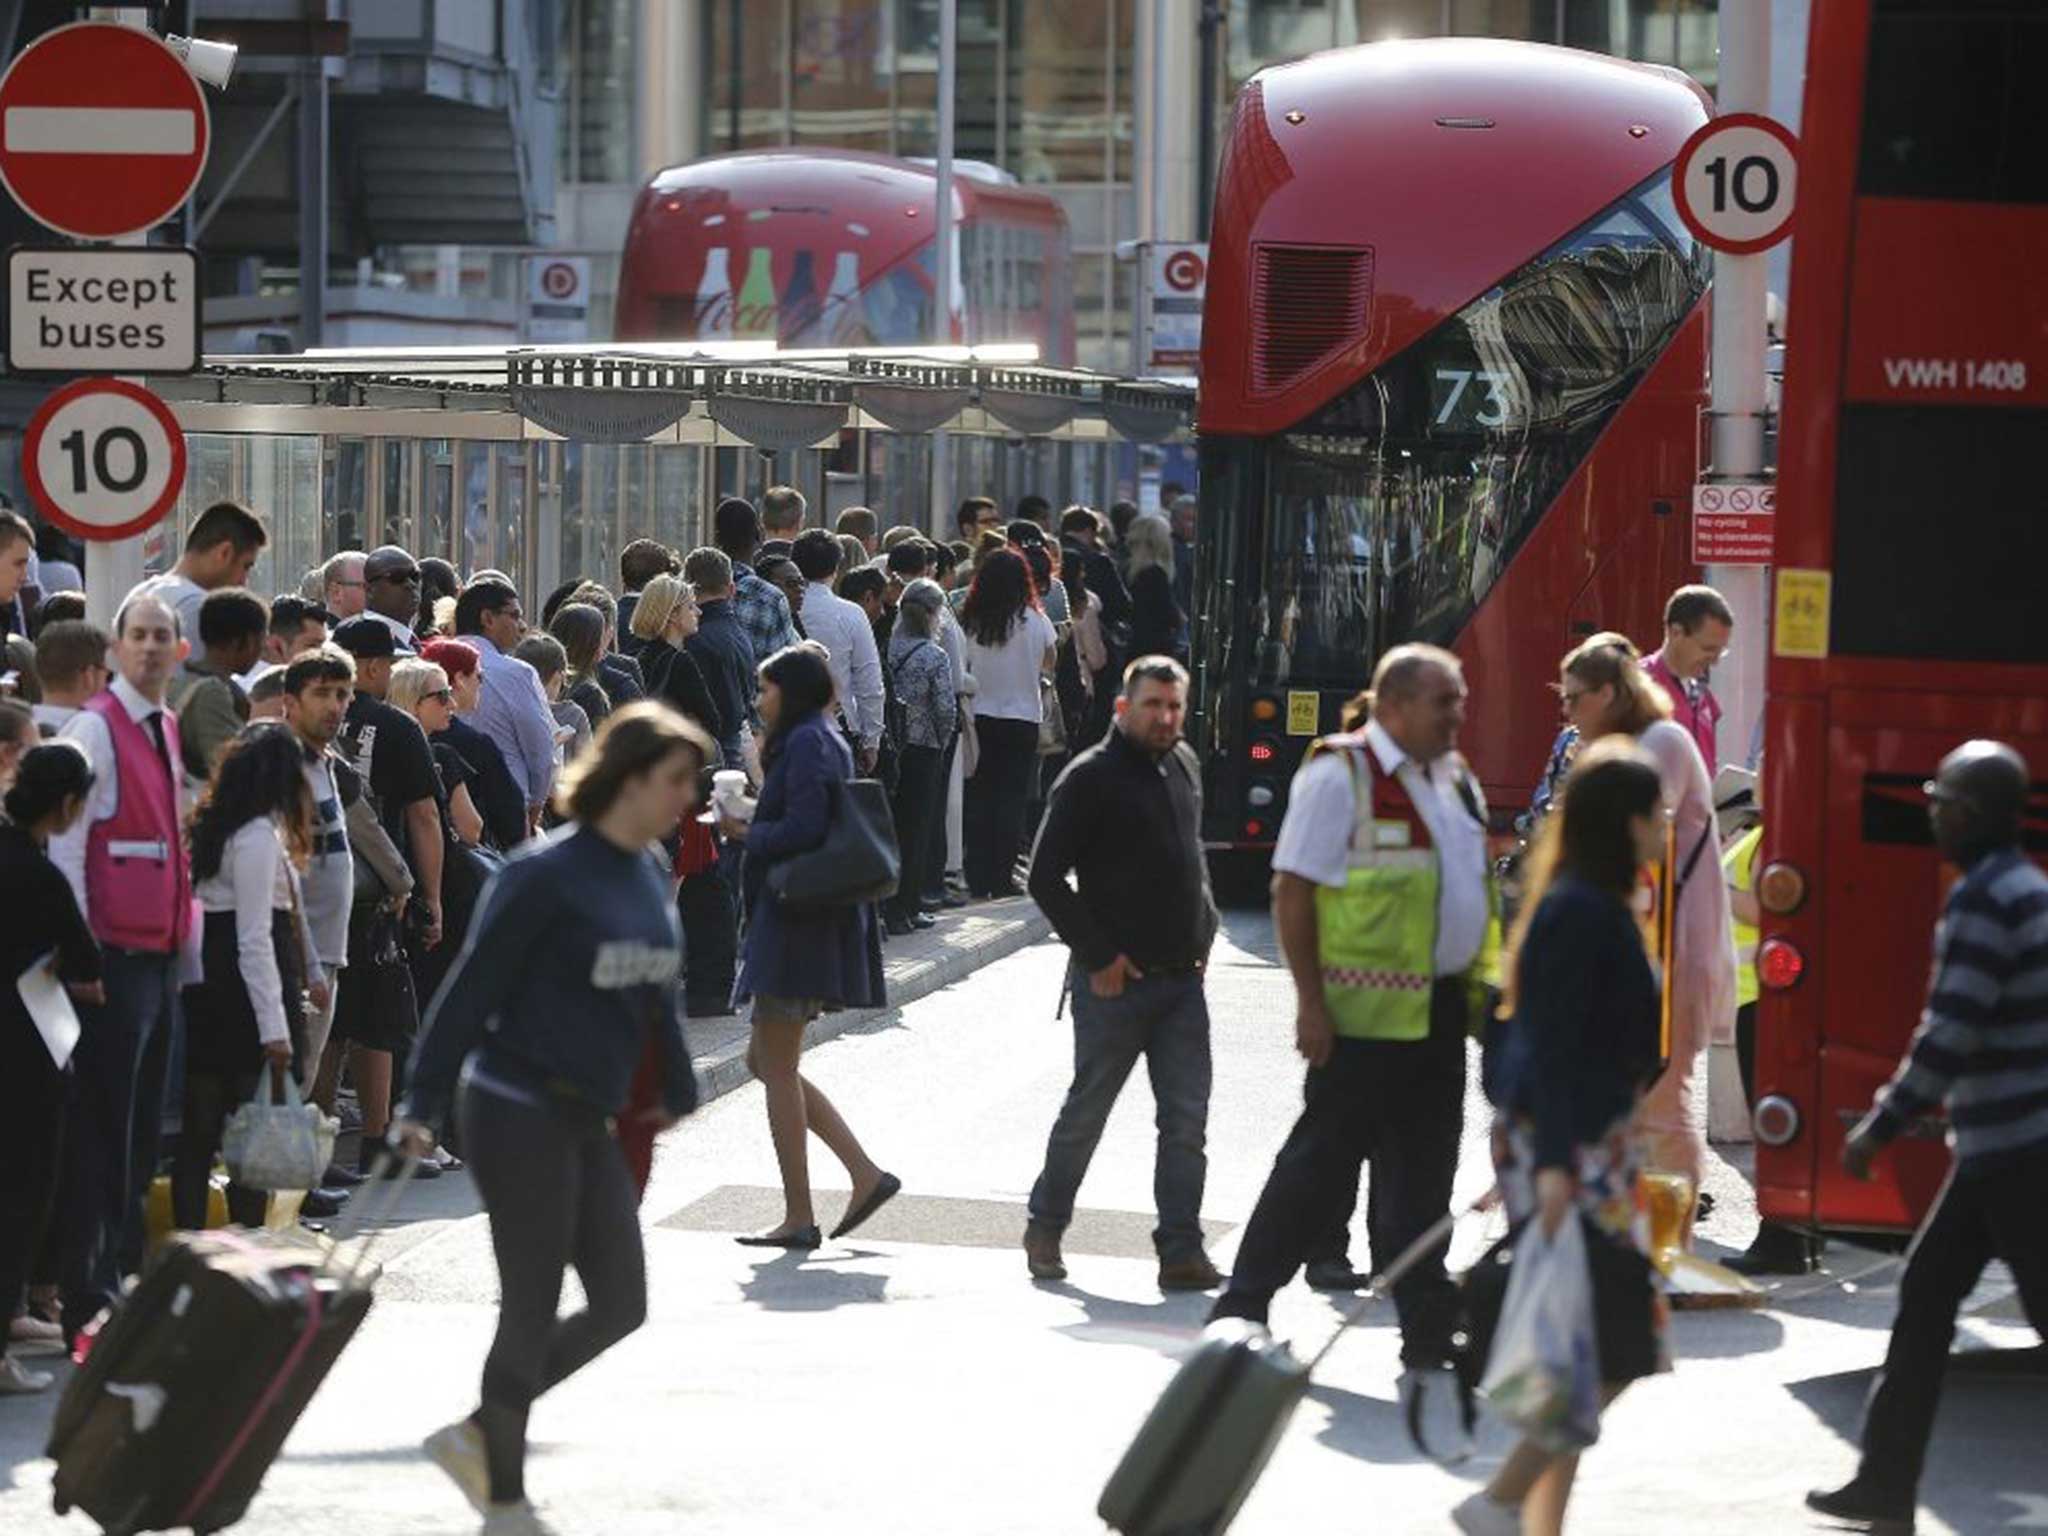 Commuters queue for buses as tube drivers are on strike in London